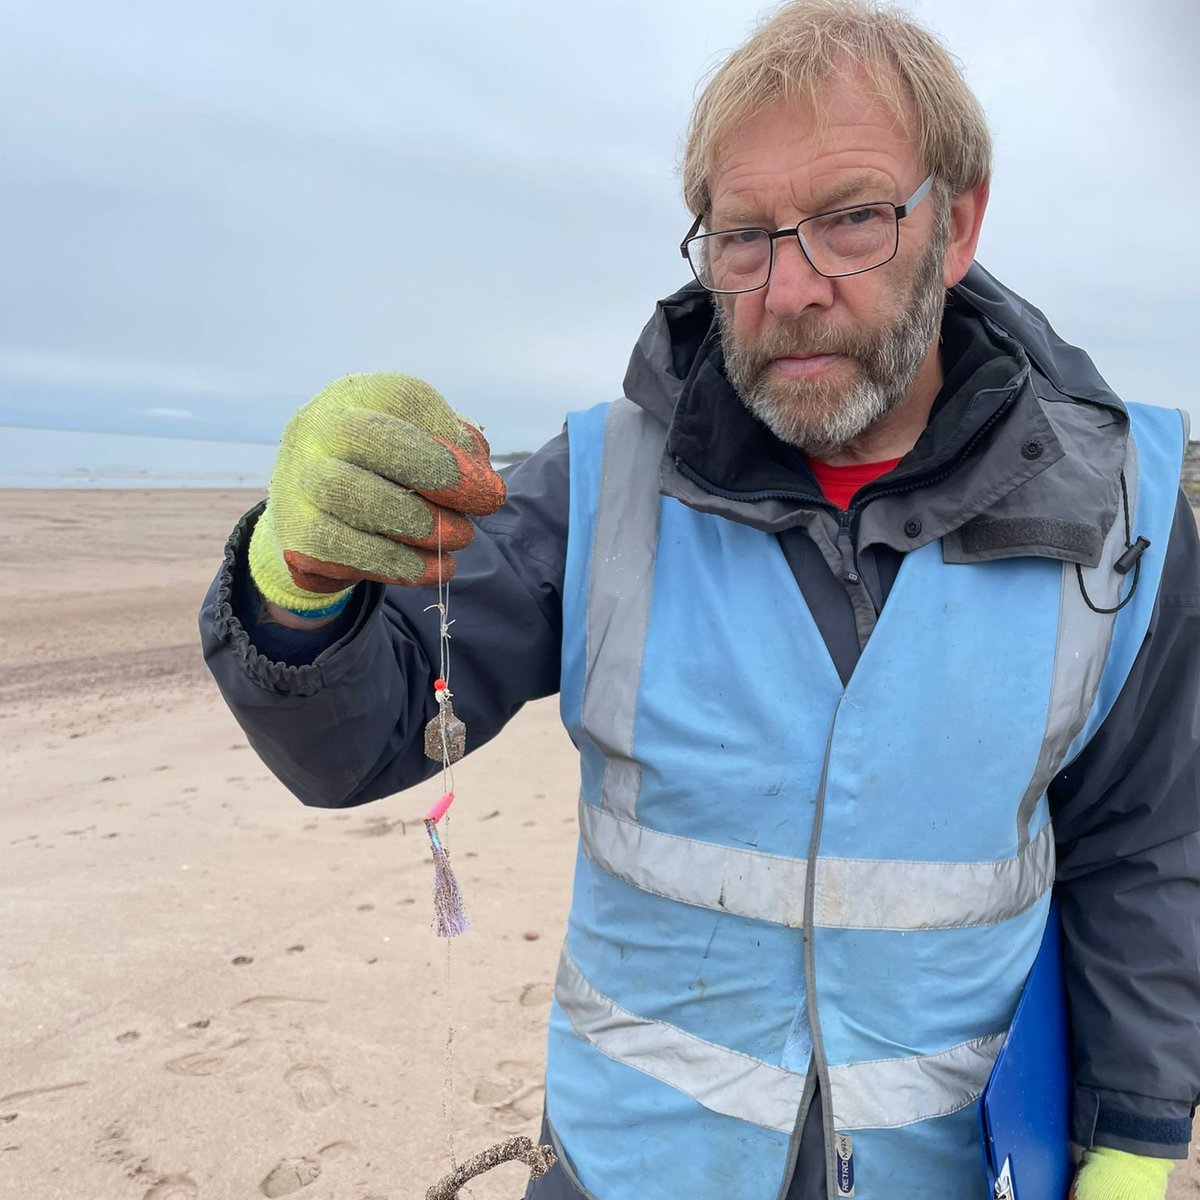 Coast Care volunteers were certainly #BeachCleanReady this weekend! We kicked off the Great British Beach Clean from @mcsuk on Friday at Spittal - great haul of litter removed by a lovely bunch 🙂 #volunteersmakeadifference #volunteering #conservation #aonb #northumberlandcoast